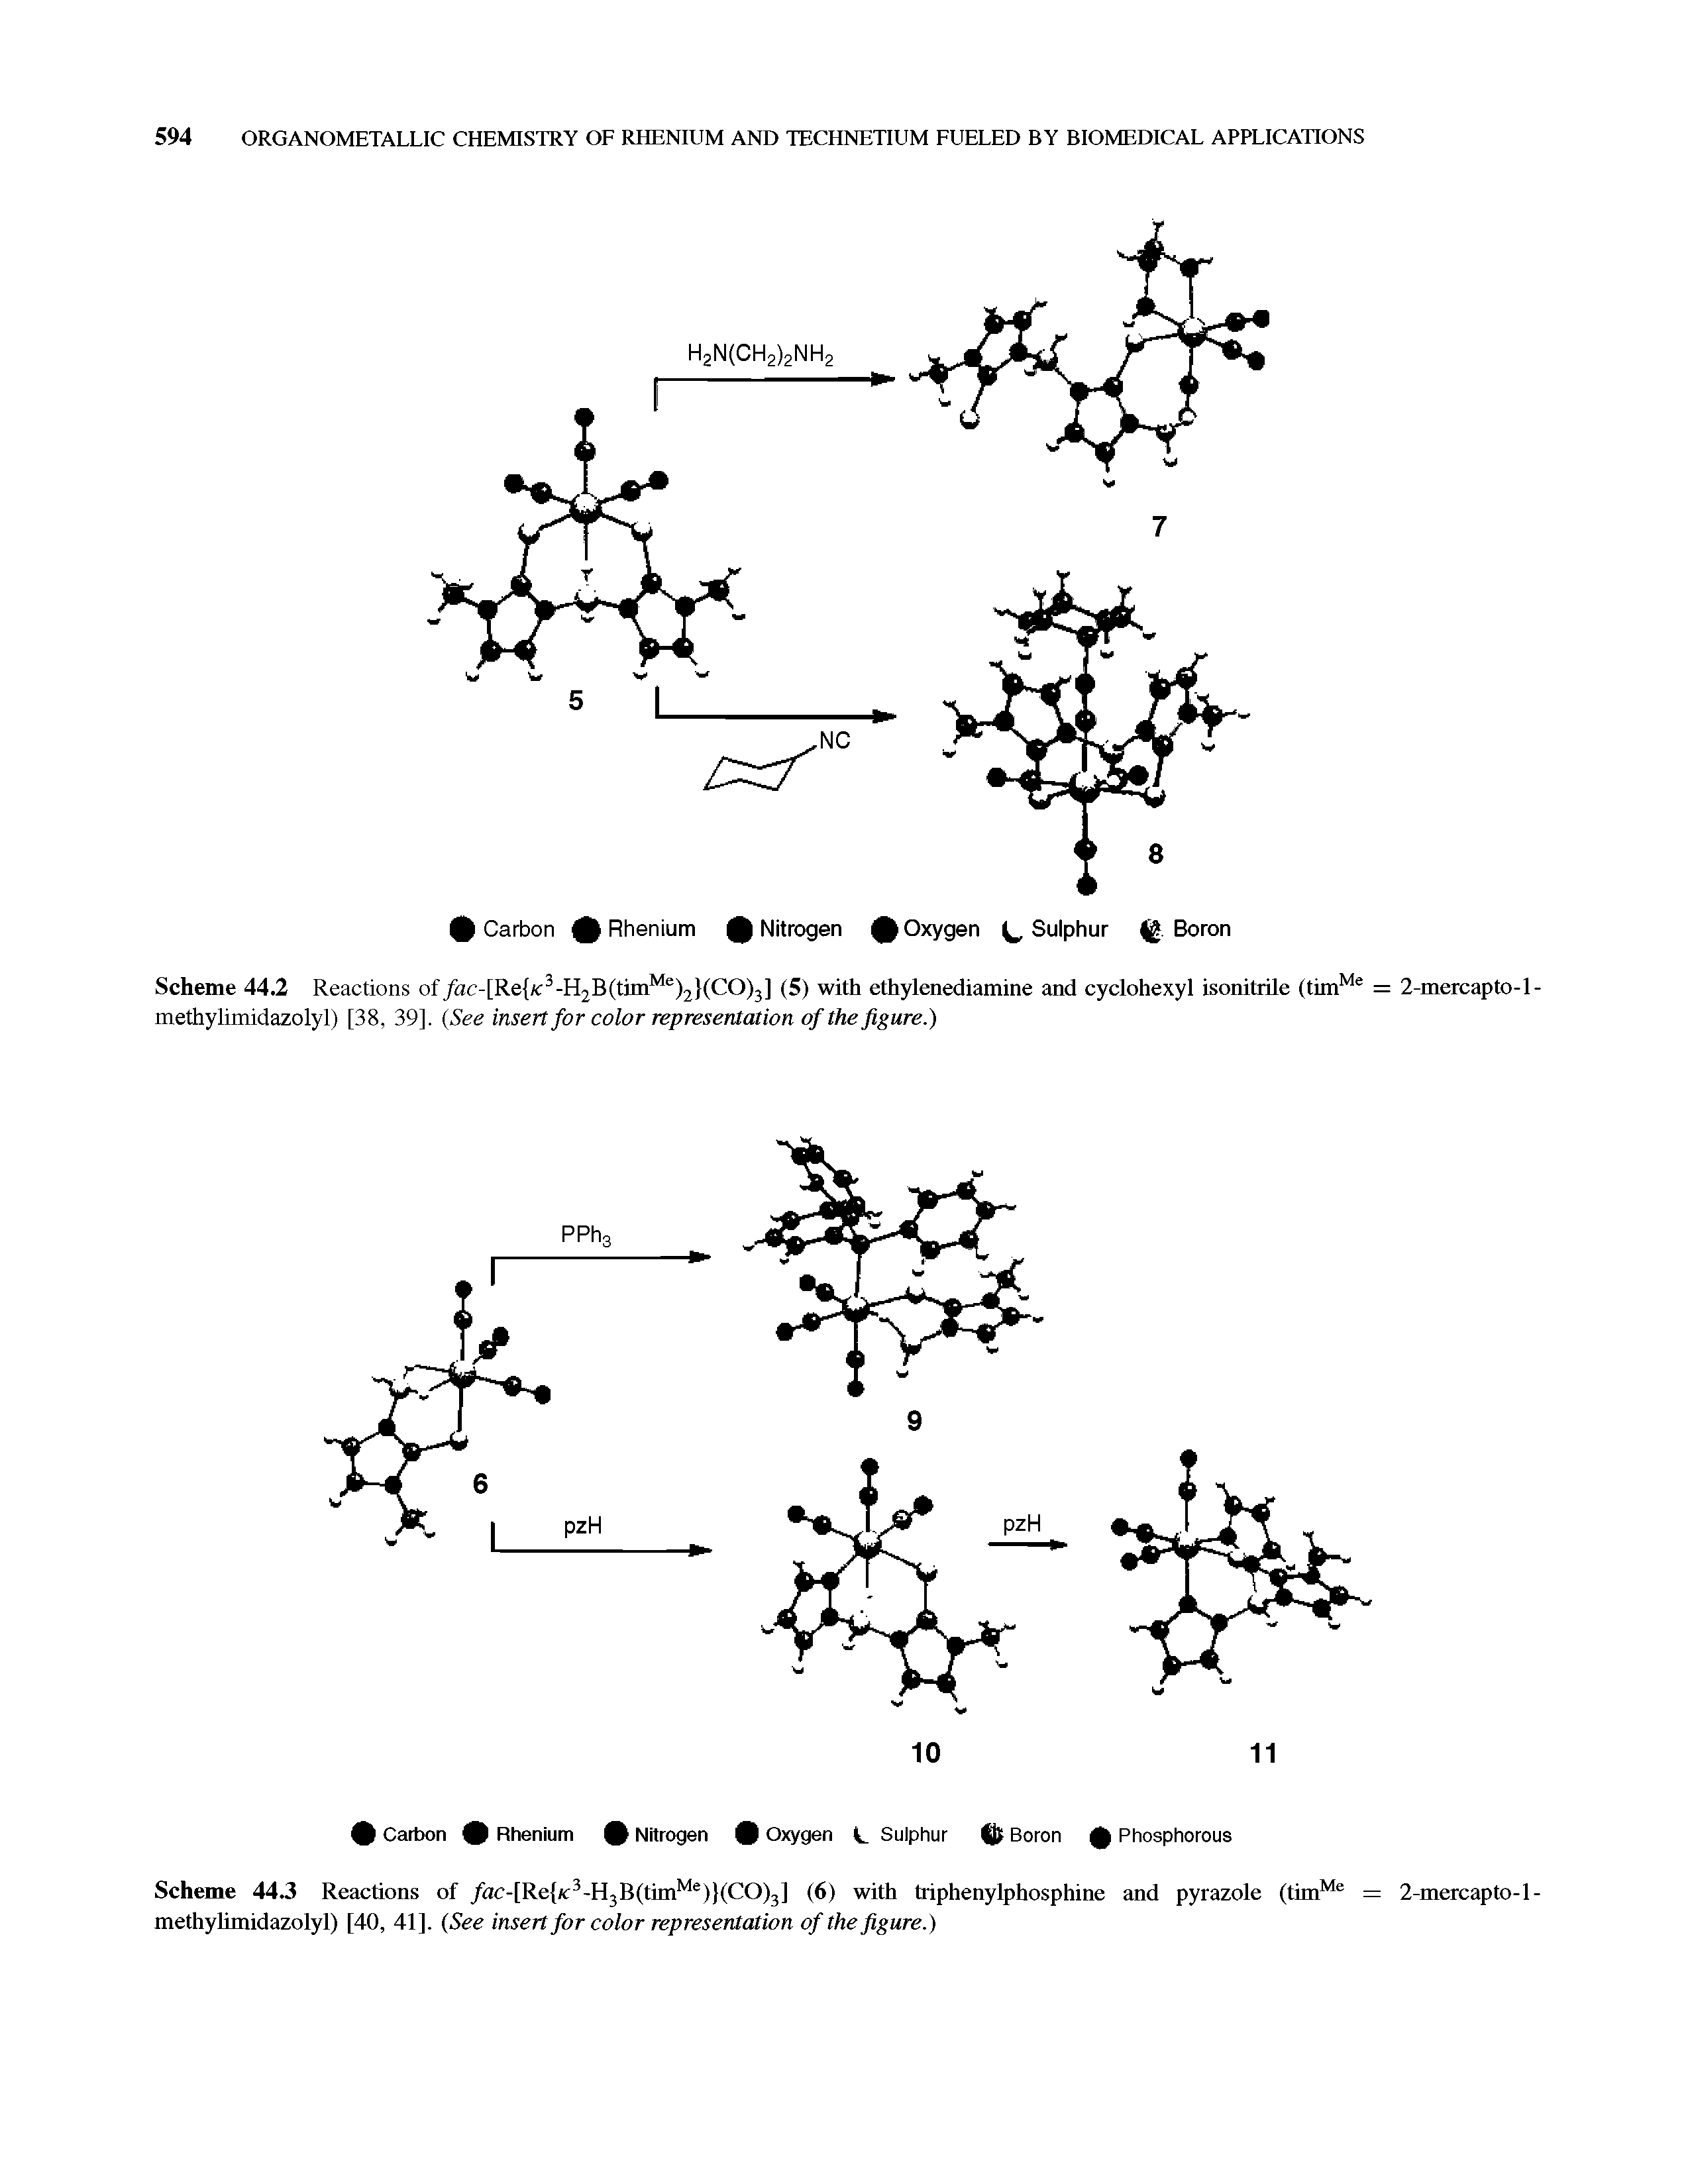 Scheme 44.2 Reactions of/ac-[Re -H2B(tim )2 (CO)3] (5) with ethylenediamine and cyclohexyl isonitrile (tim = 2-mercapto-l-methylimidazolyl) [38, 39]. (See insert for color representation of the figure.)...